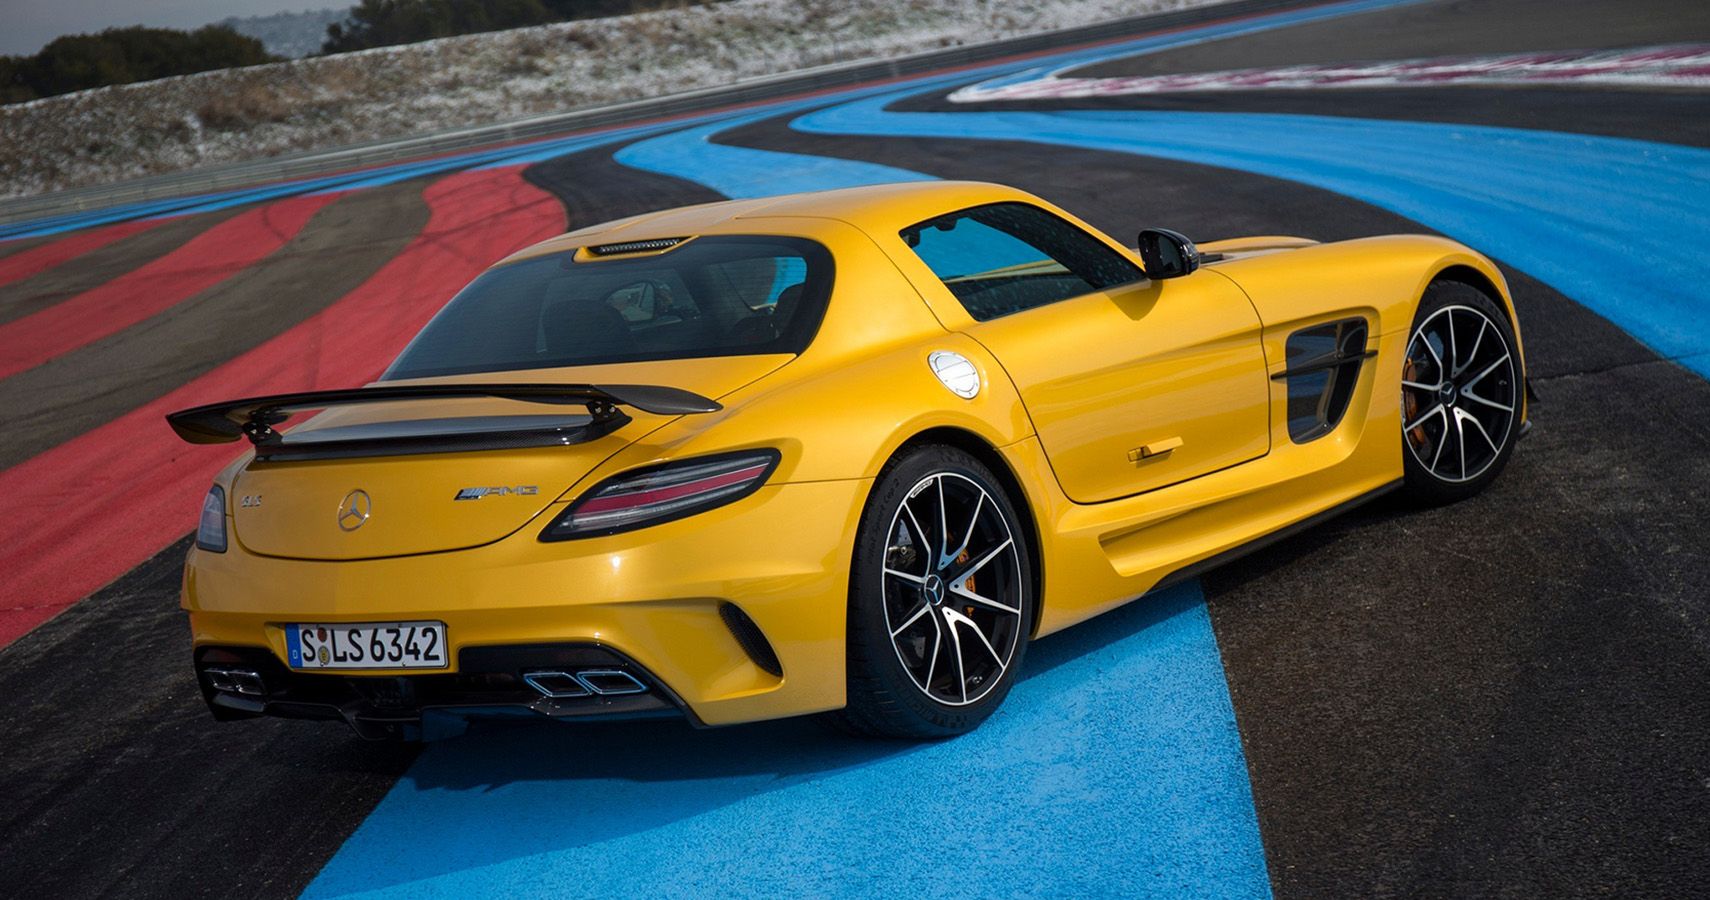 The SLS AMG Black Series Is Also Notable Mostly Because It Came With Carbon Fiber Components That Made It Lighter And Faster, Able To Make 622 Horses